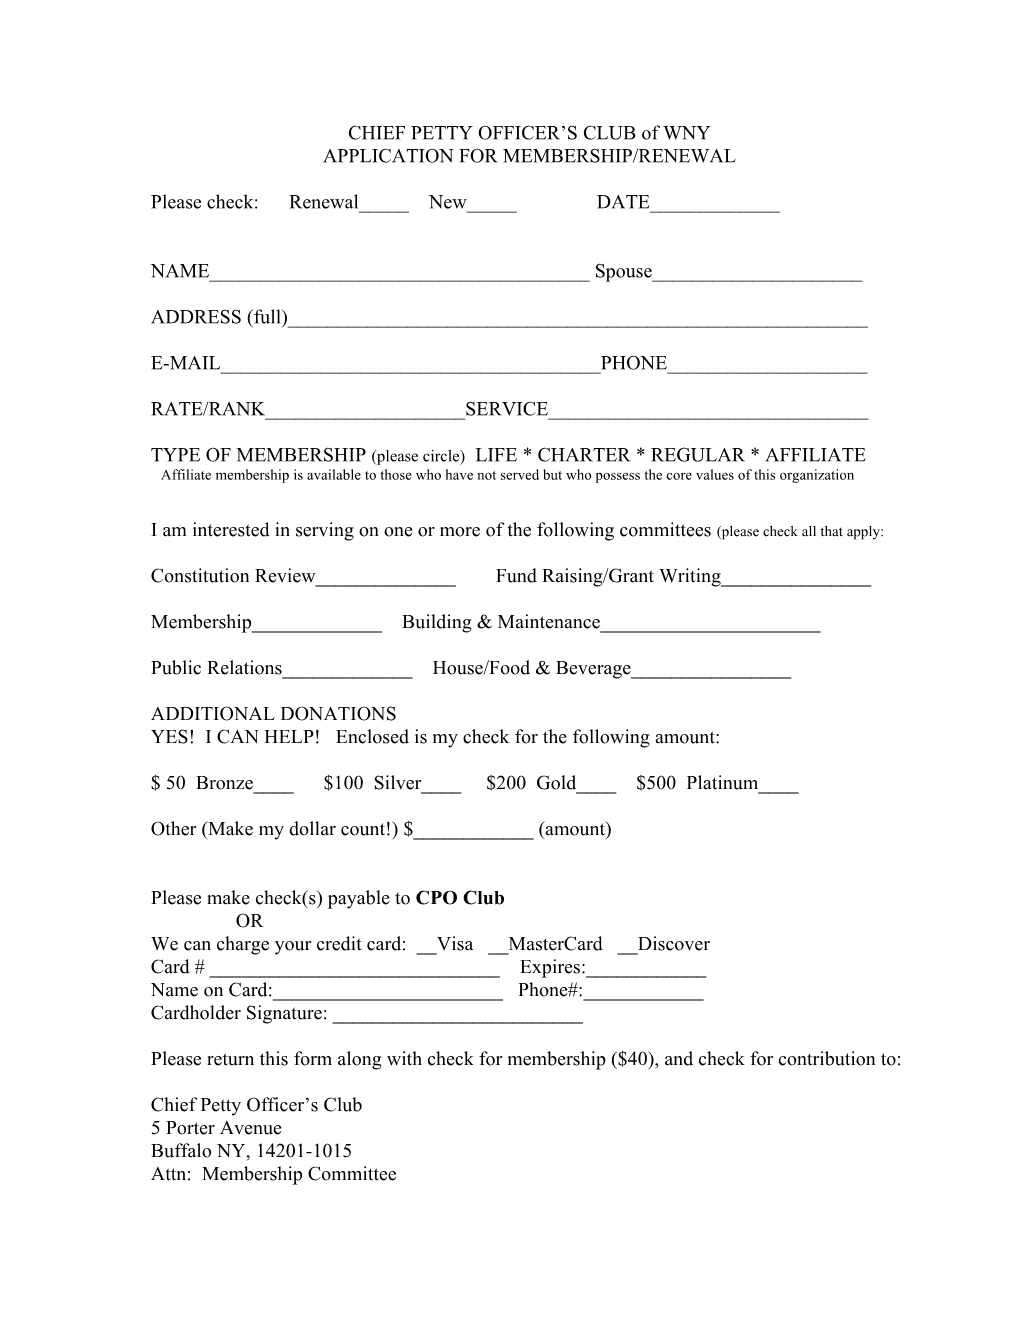 CHIEF PETTY OFFICER S CLUB of WNY APPLICATION for MEMBERSHIP